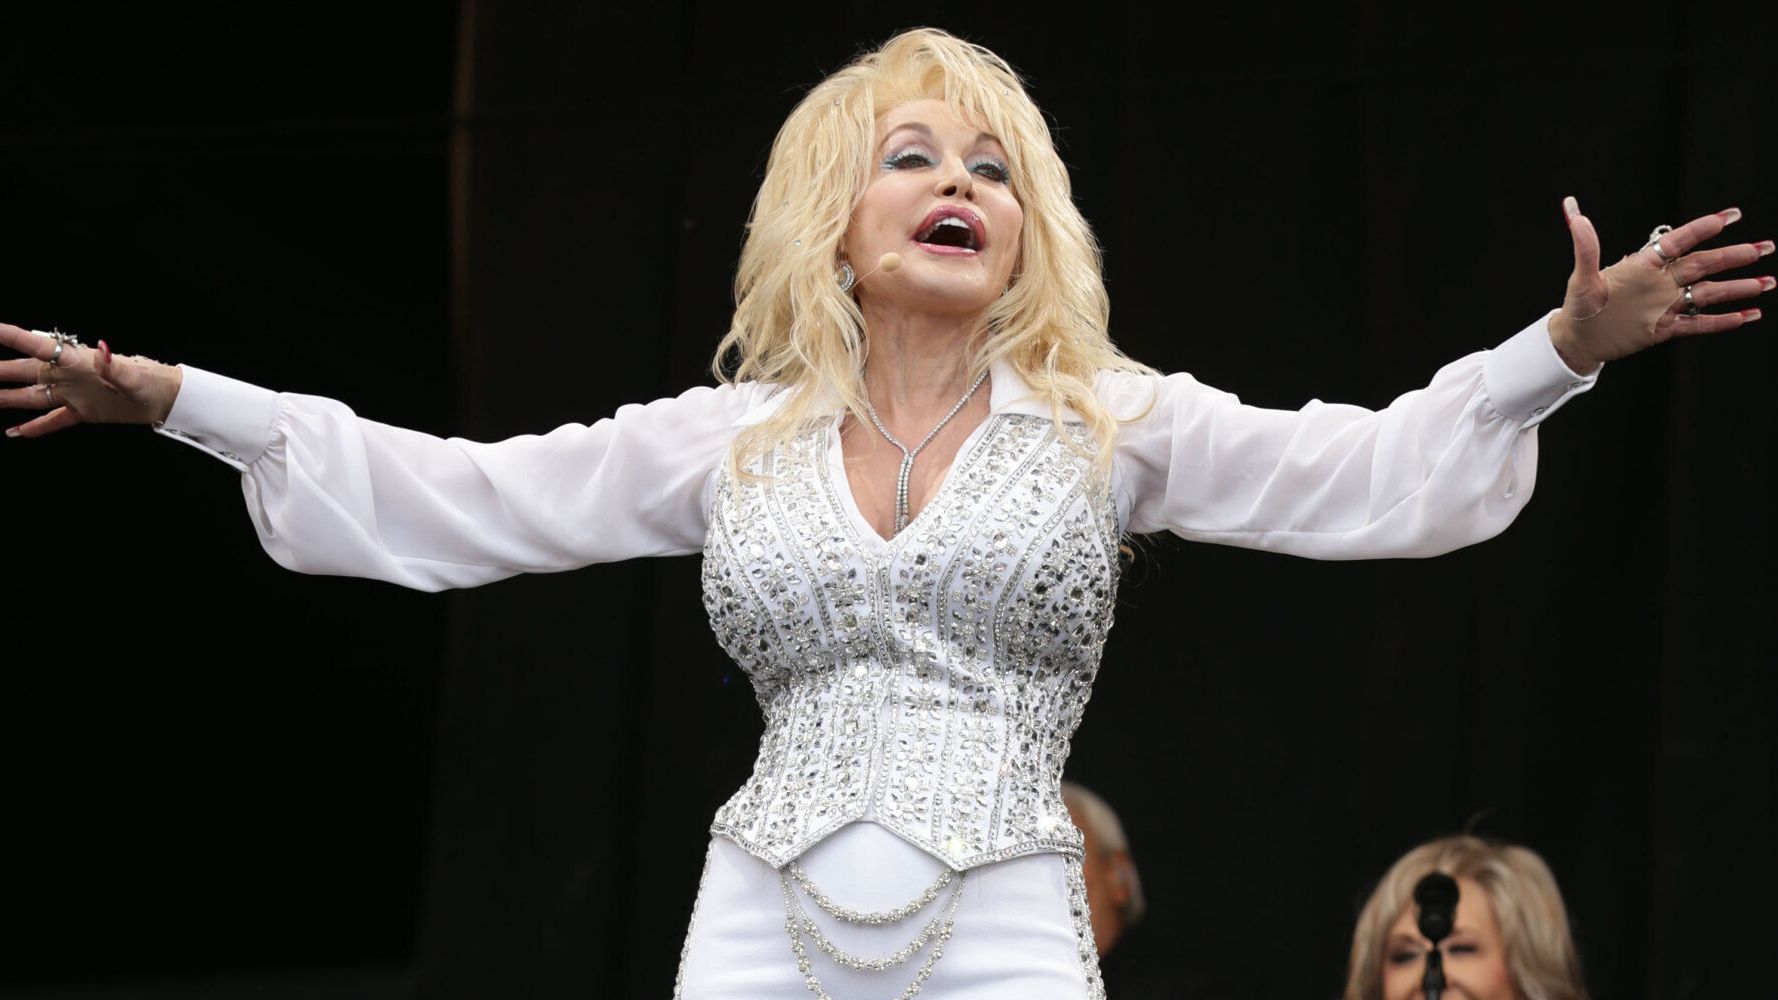 Dolly Parton Sex Videos Coming - Dolly Parton On Glastonbury Miming Accusations: 'My Boobs And Hair Are Fake  But What Is Real Is My Voice' | HuffPost UK Entertainment